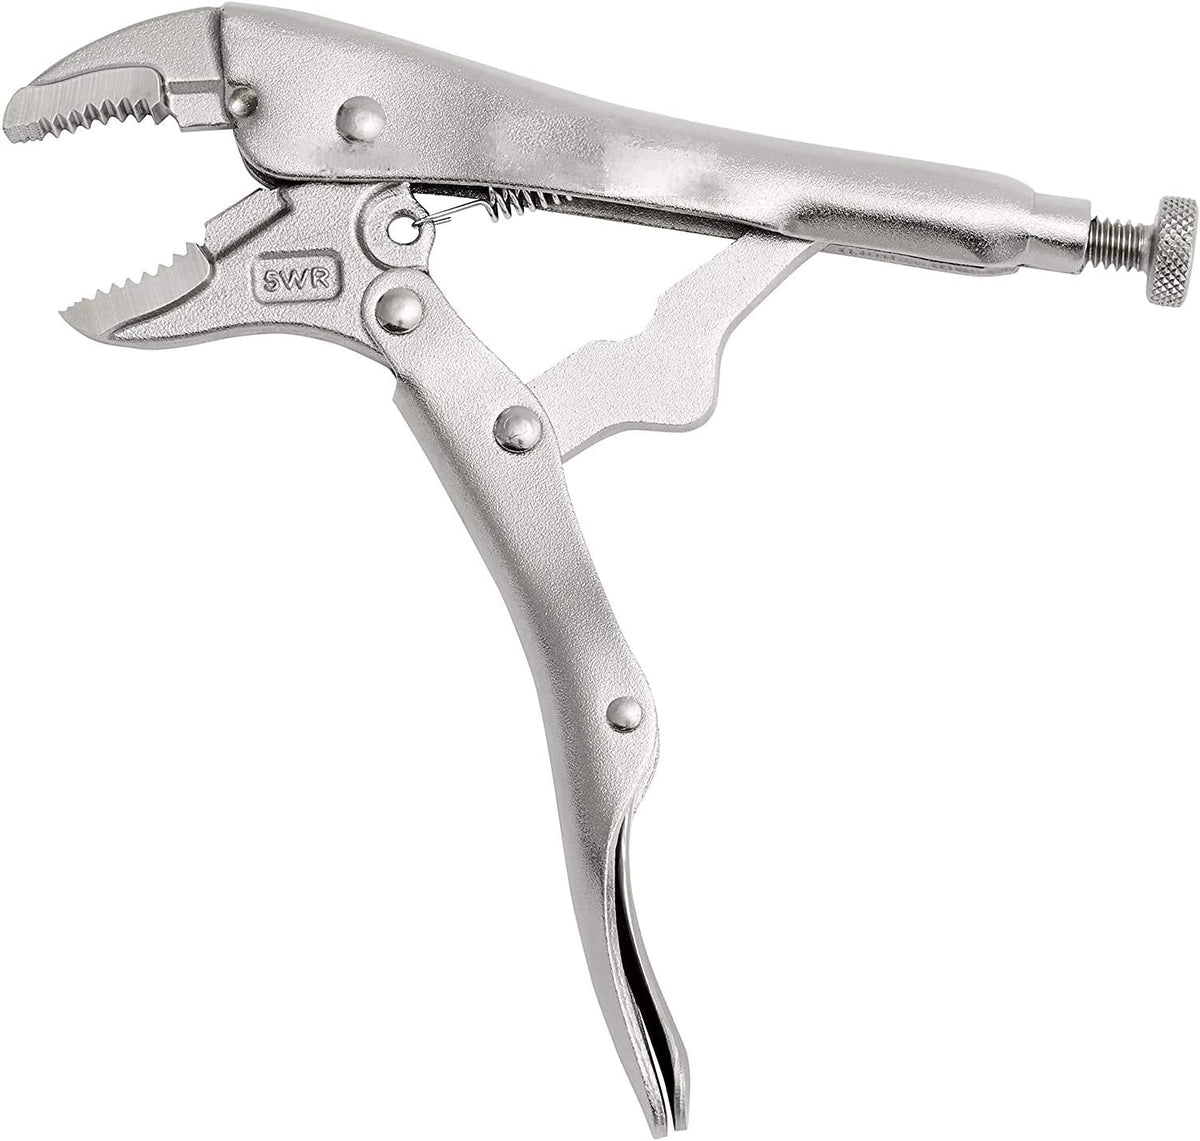 Locking Pliers with Wire Cutter, Curved Jaw, 10-Inch